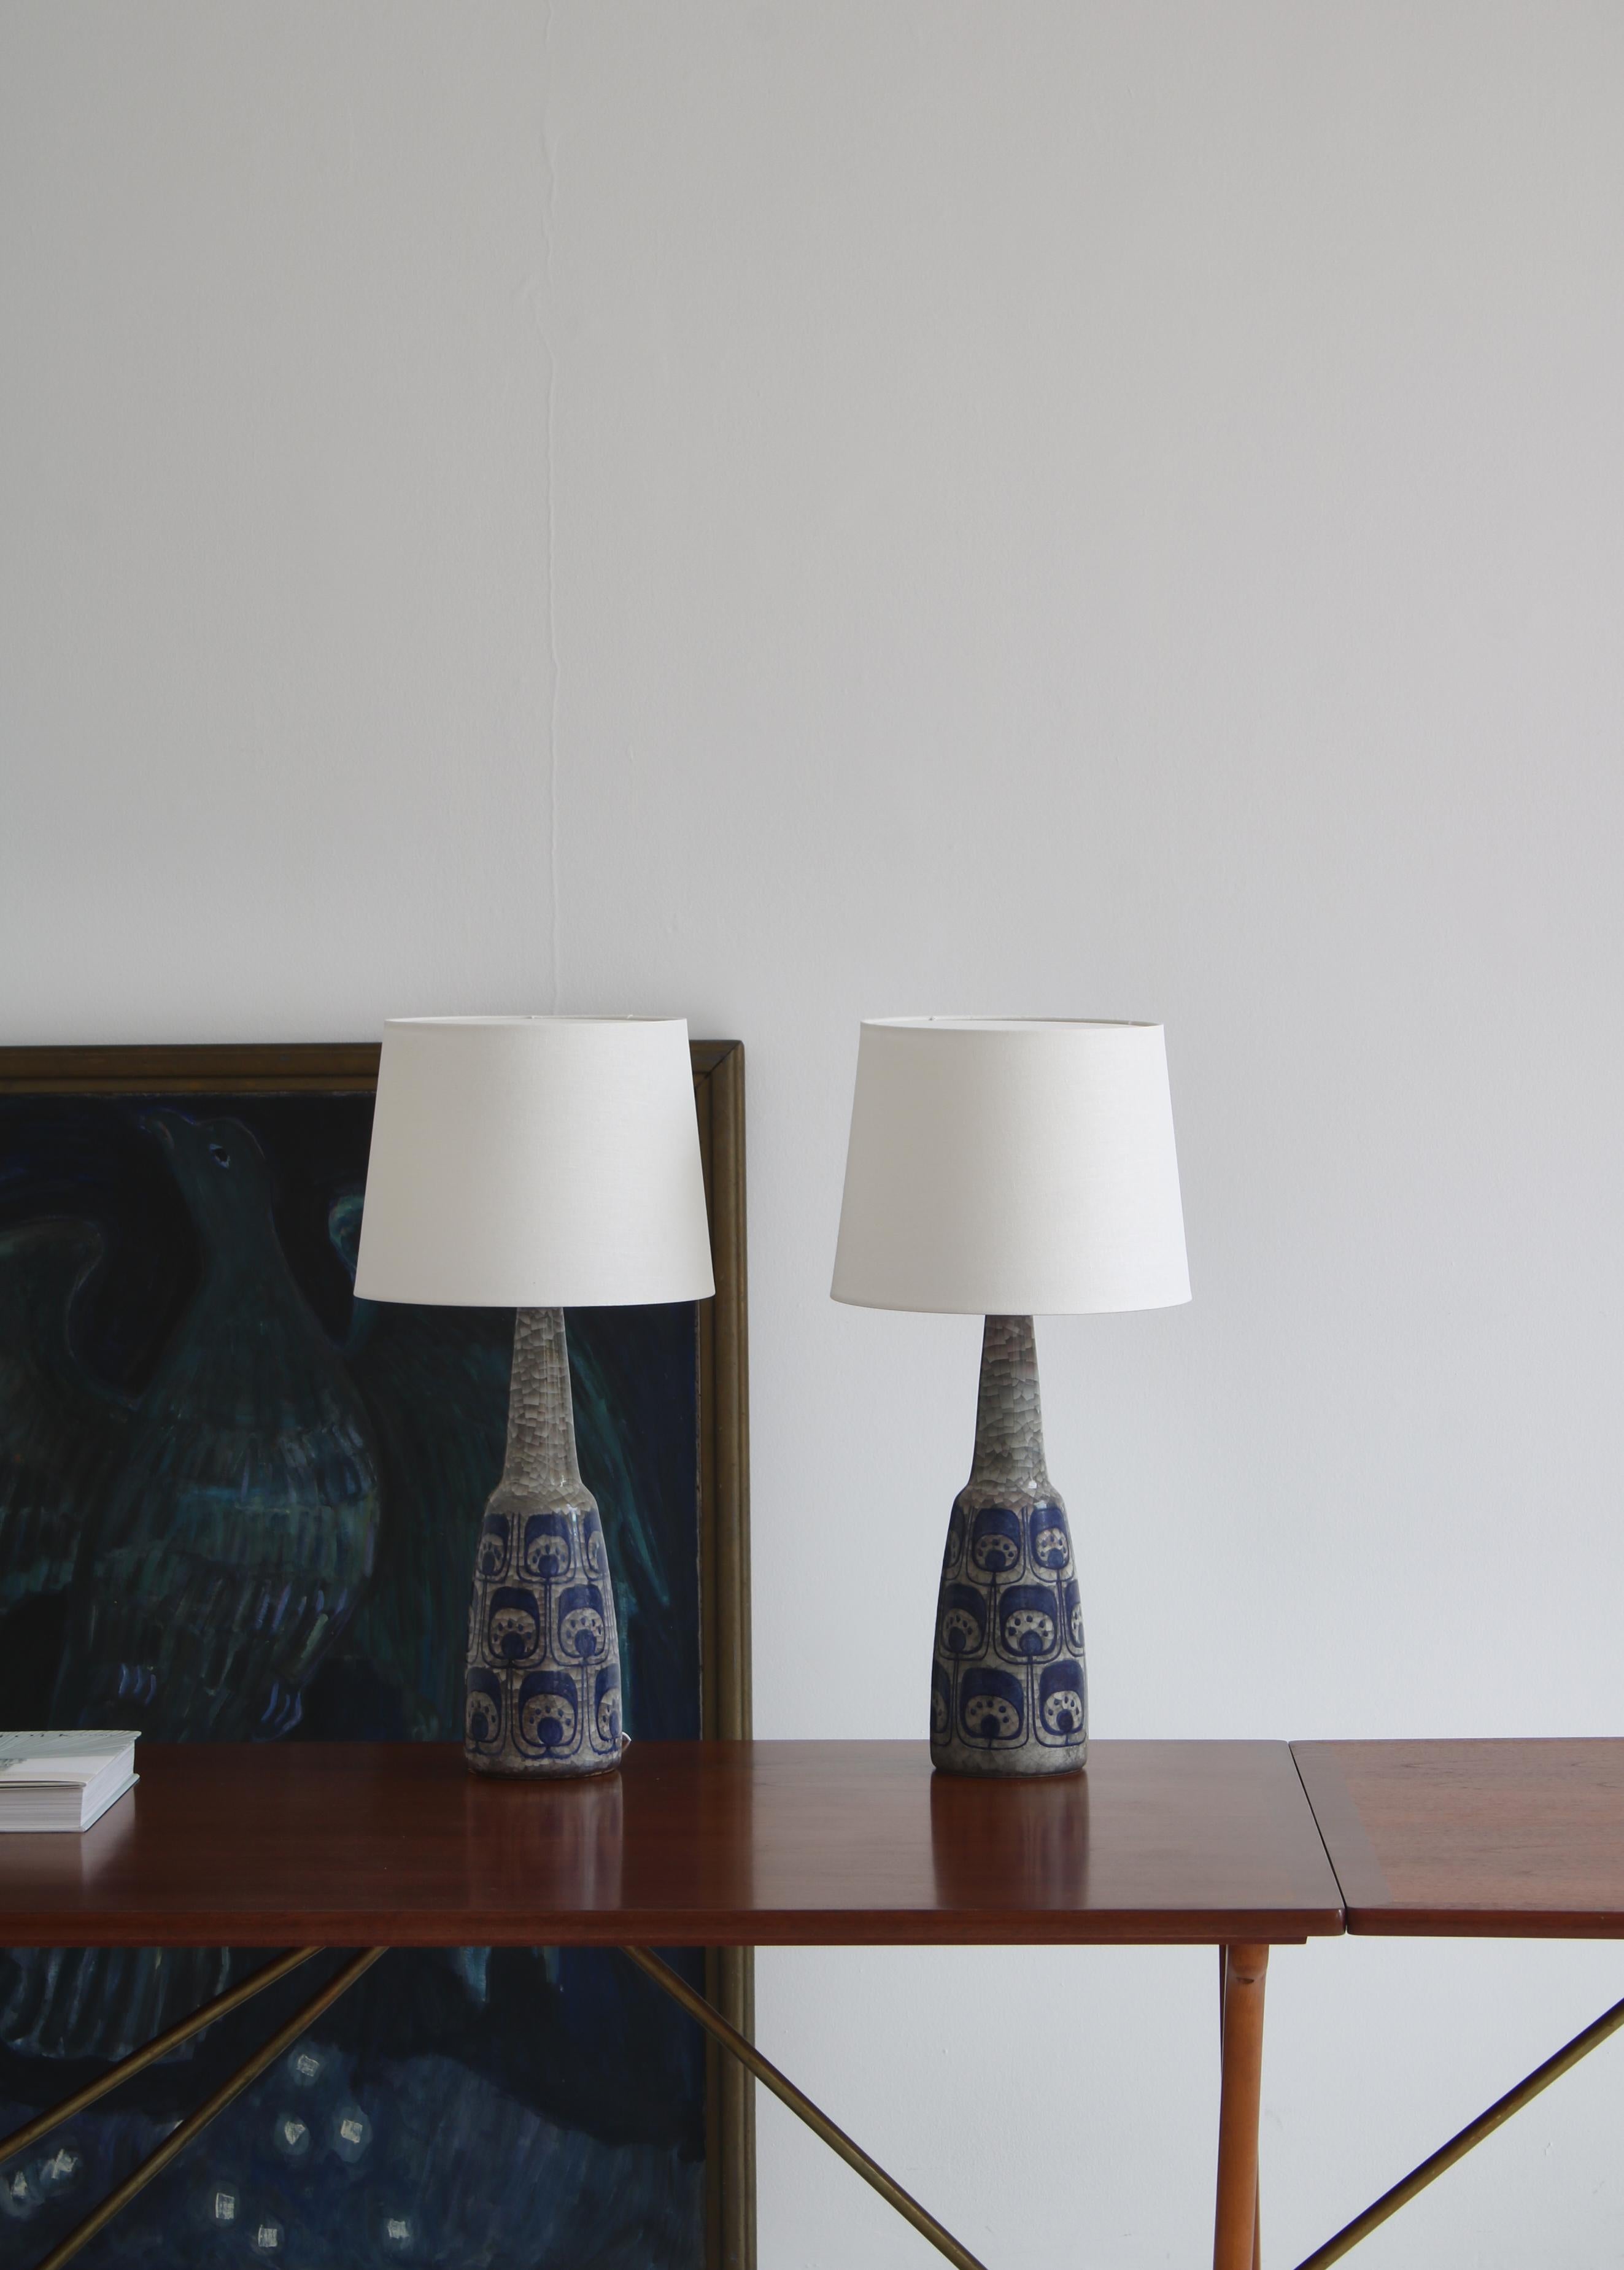 Stunning pair of unique ceramics table lamps made in Denmark in the 1960s at the workshop of Michael Andersen & Son on the small Danish isle of Bornholm. The lamps were designed by artist Marianne Stack and features glossy gray crackle 